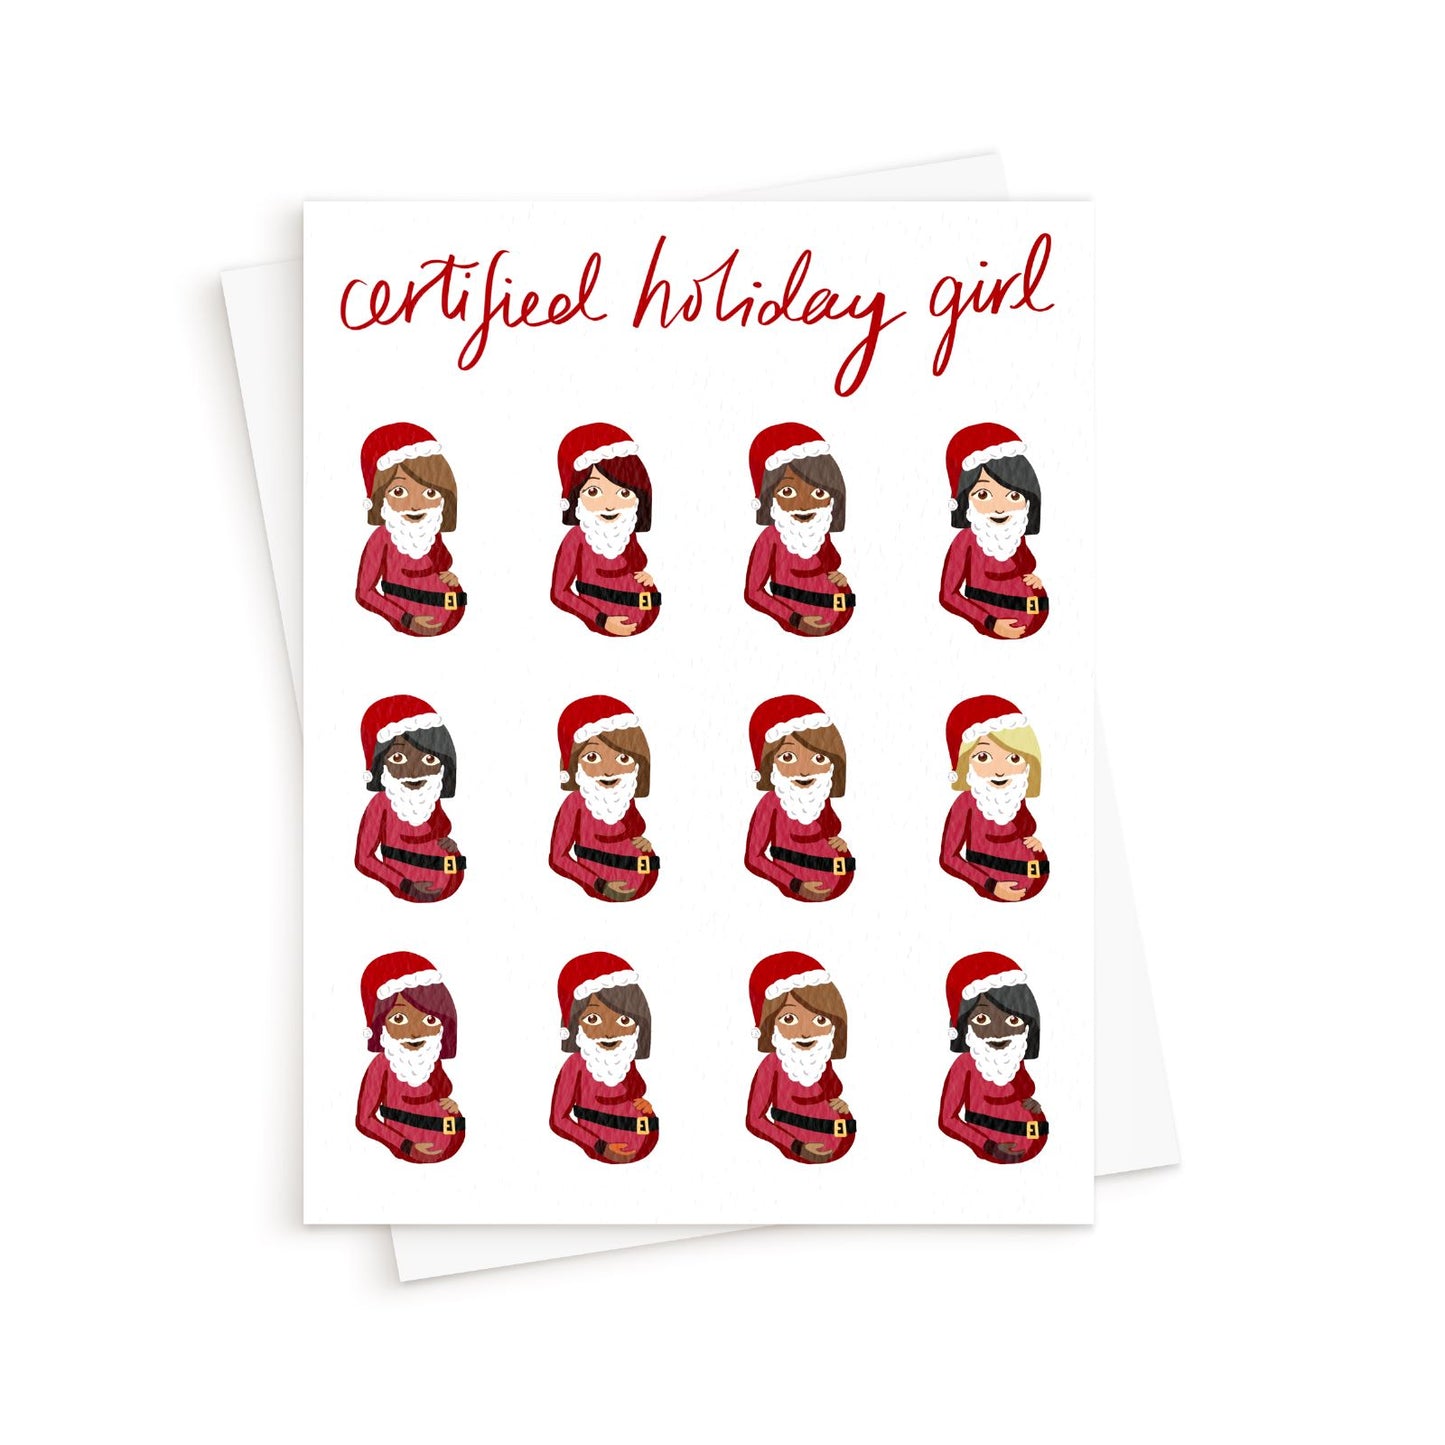 The Certified Holiday Girl Card